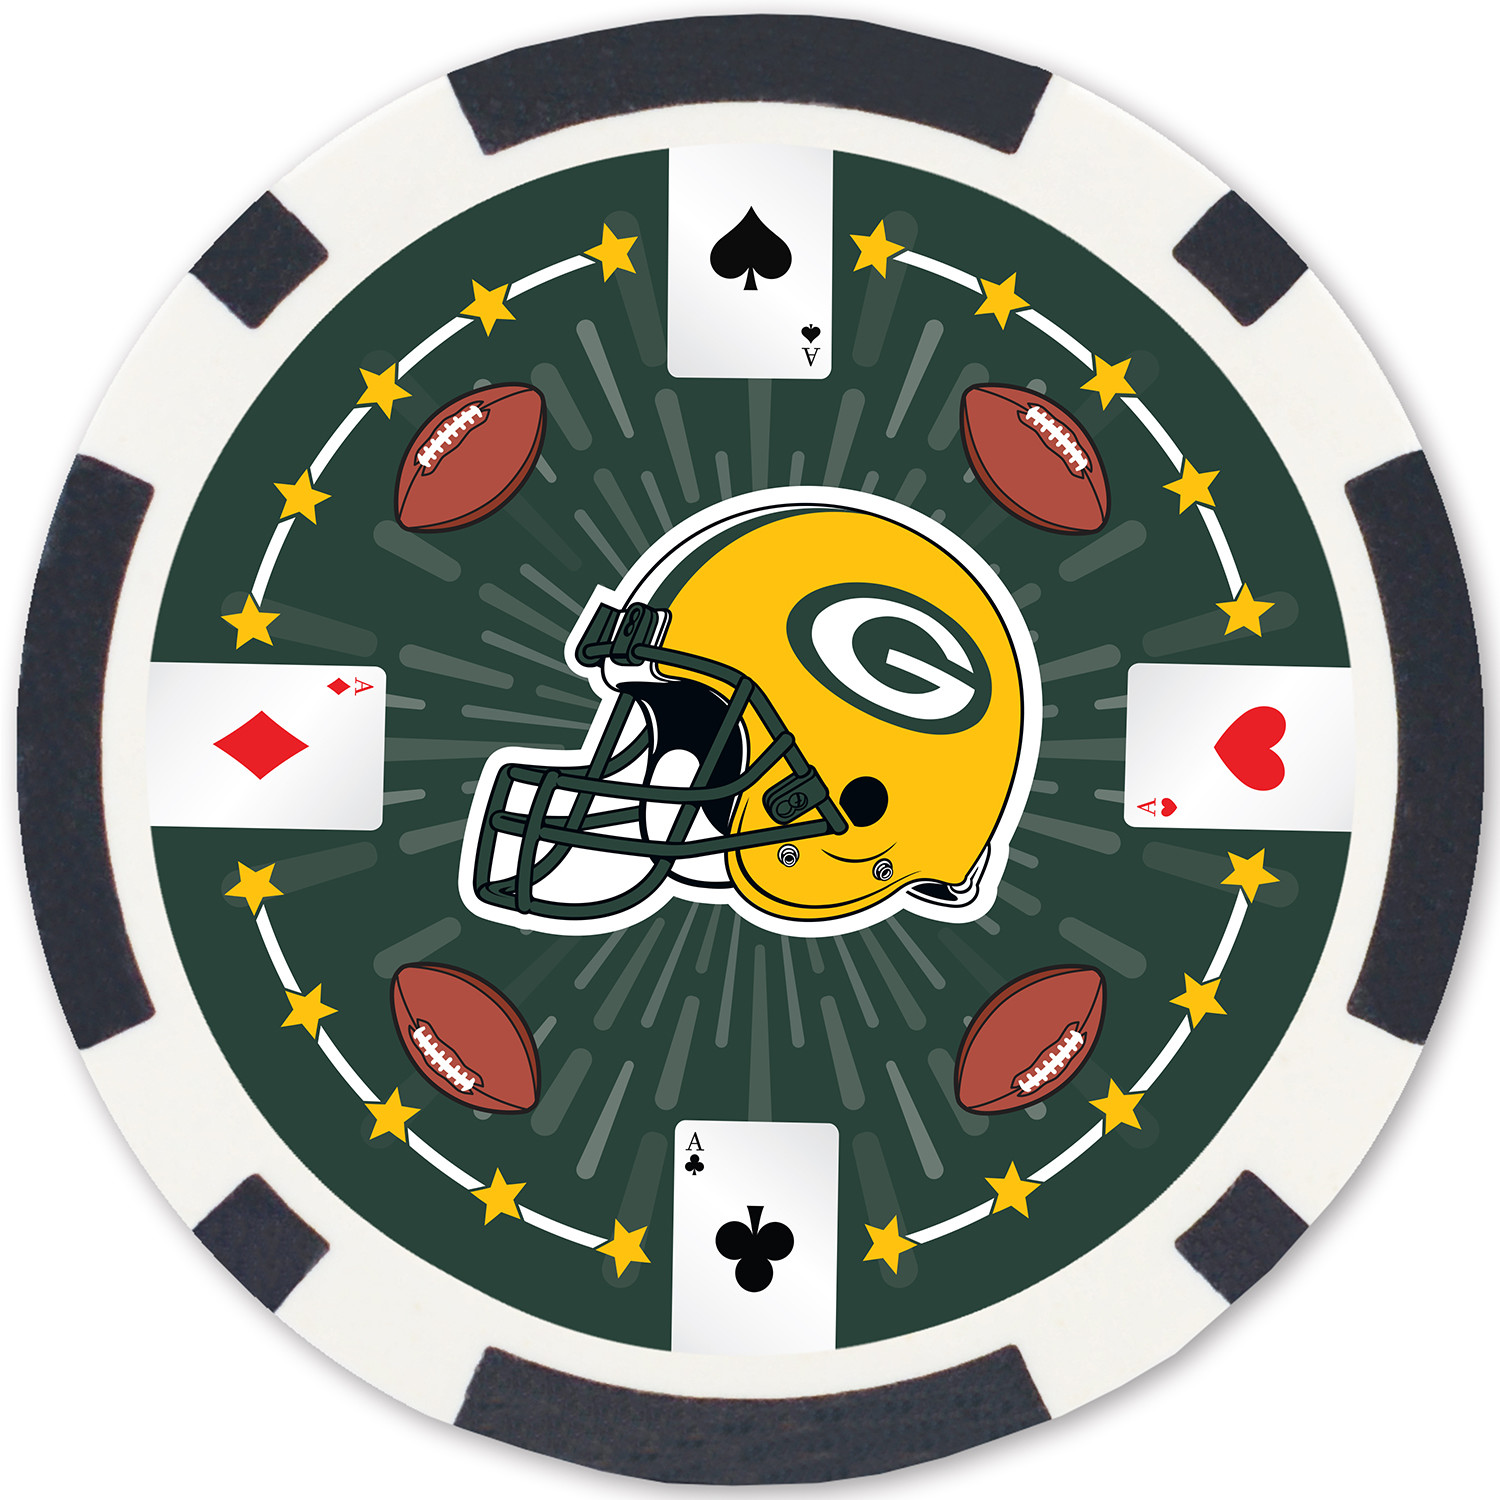 MasterPieces Casino Style 100 Piece Poker Chip Set - NFL Green Bay Packers - image 4 of 6